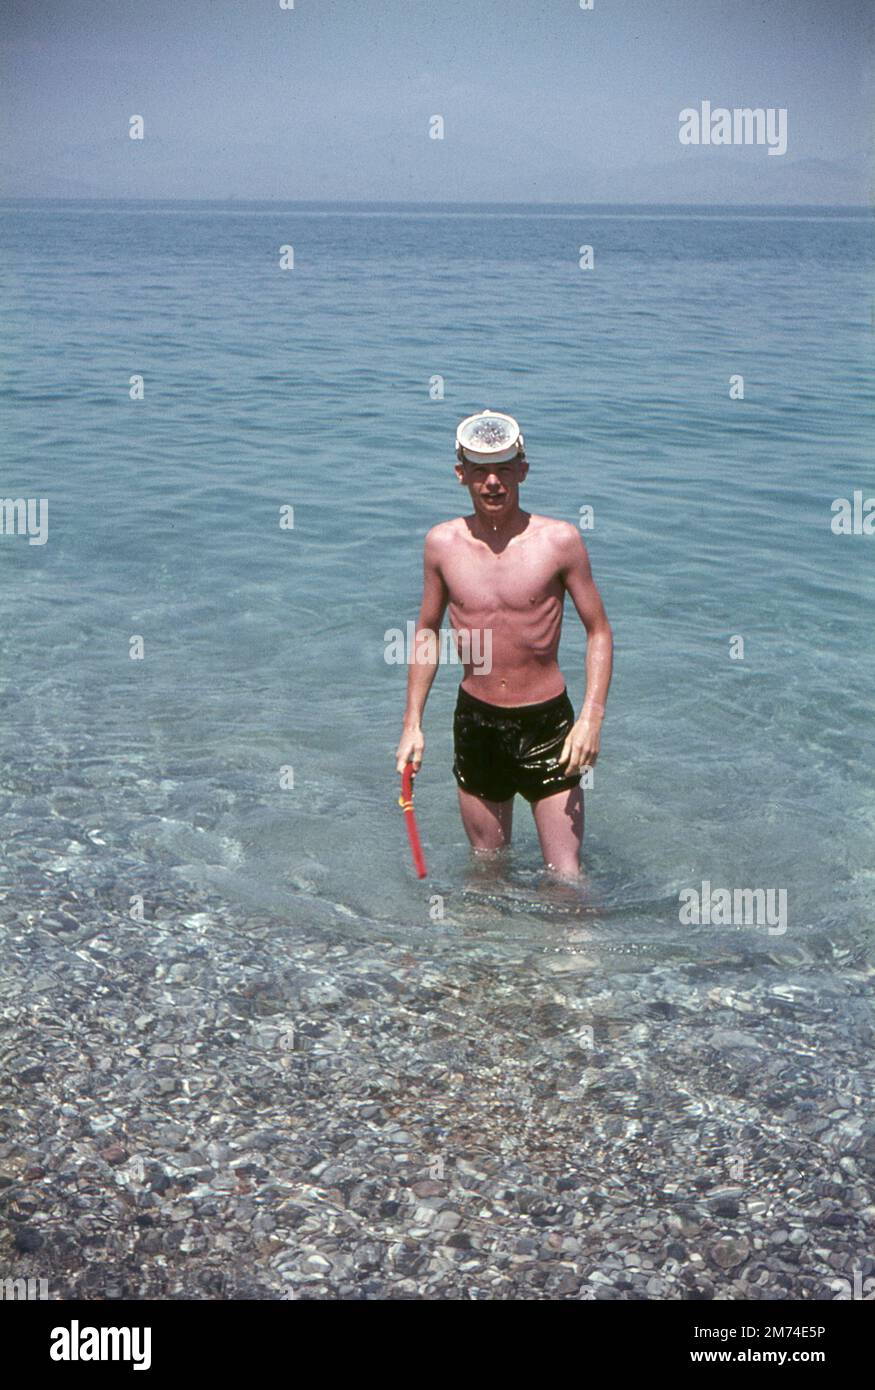 Xylokastro, Greece. August 1963. A young man returning to the beach after snorkelling in the Gulf of Corinth at the seaside town of Xylokastro in Corinthia in the Peloponnese, Greece. He has a scuba diving mask on his forehead and is holding a snorkel in his hand. The hills/mountains on the Greek mainland are visible on the horizon. Stock Photo